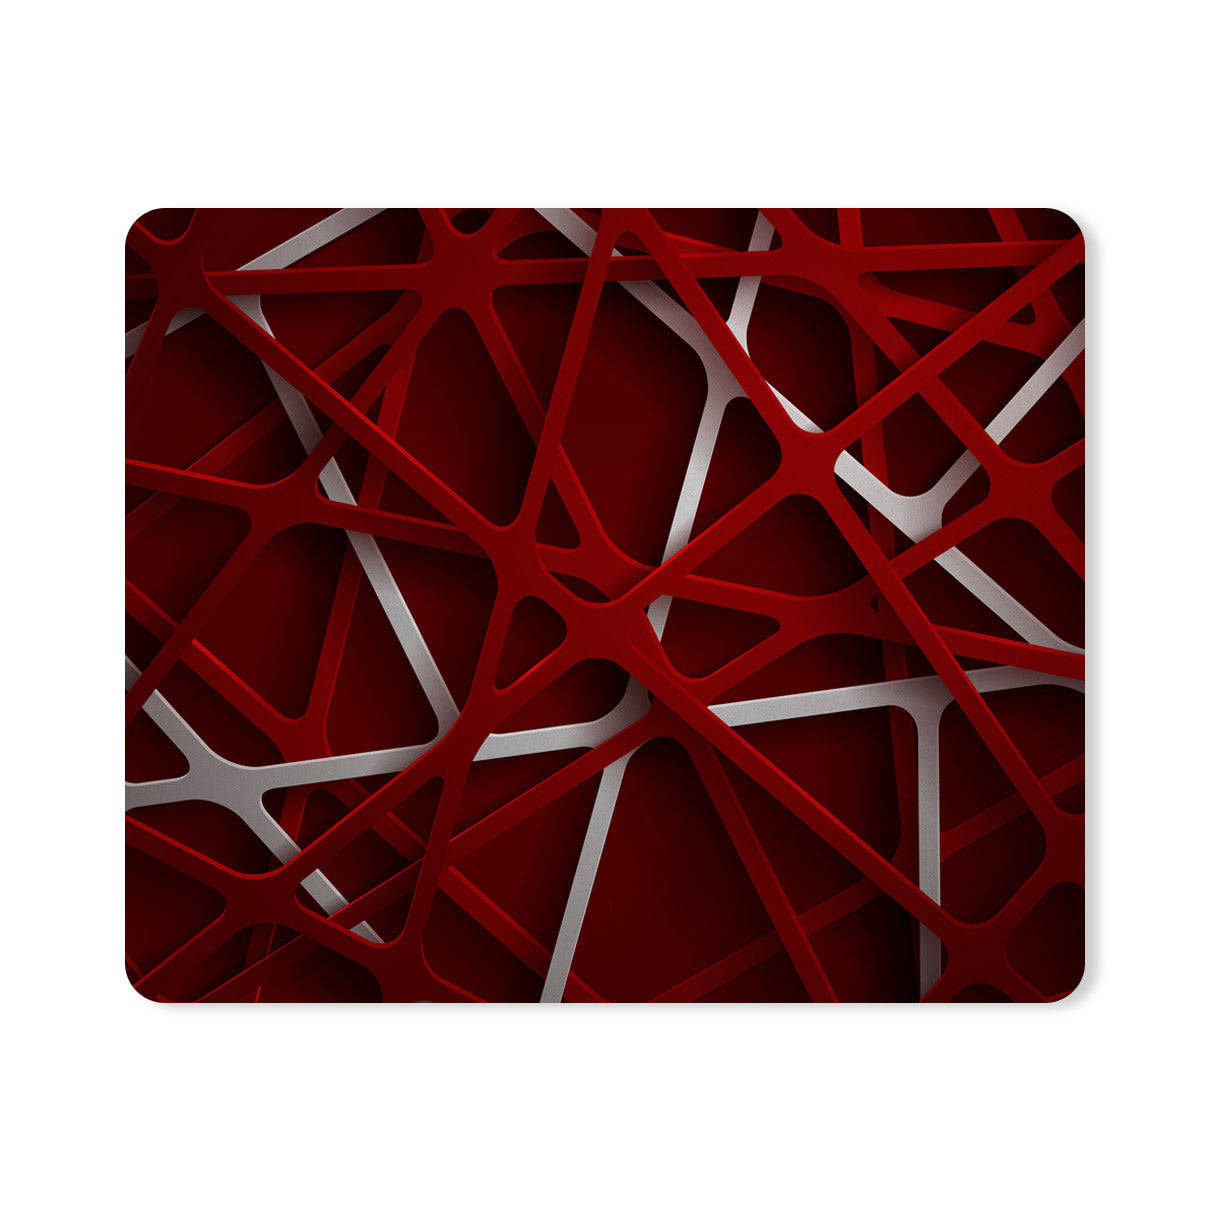 3d Abstract Design Red Designer Printed Premium Mouse pad (9 in x 7.5 in)